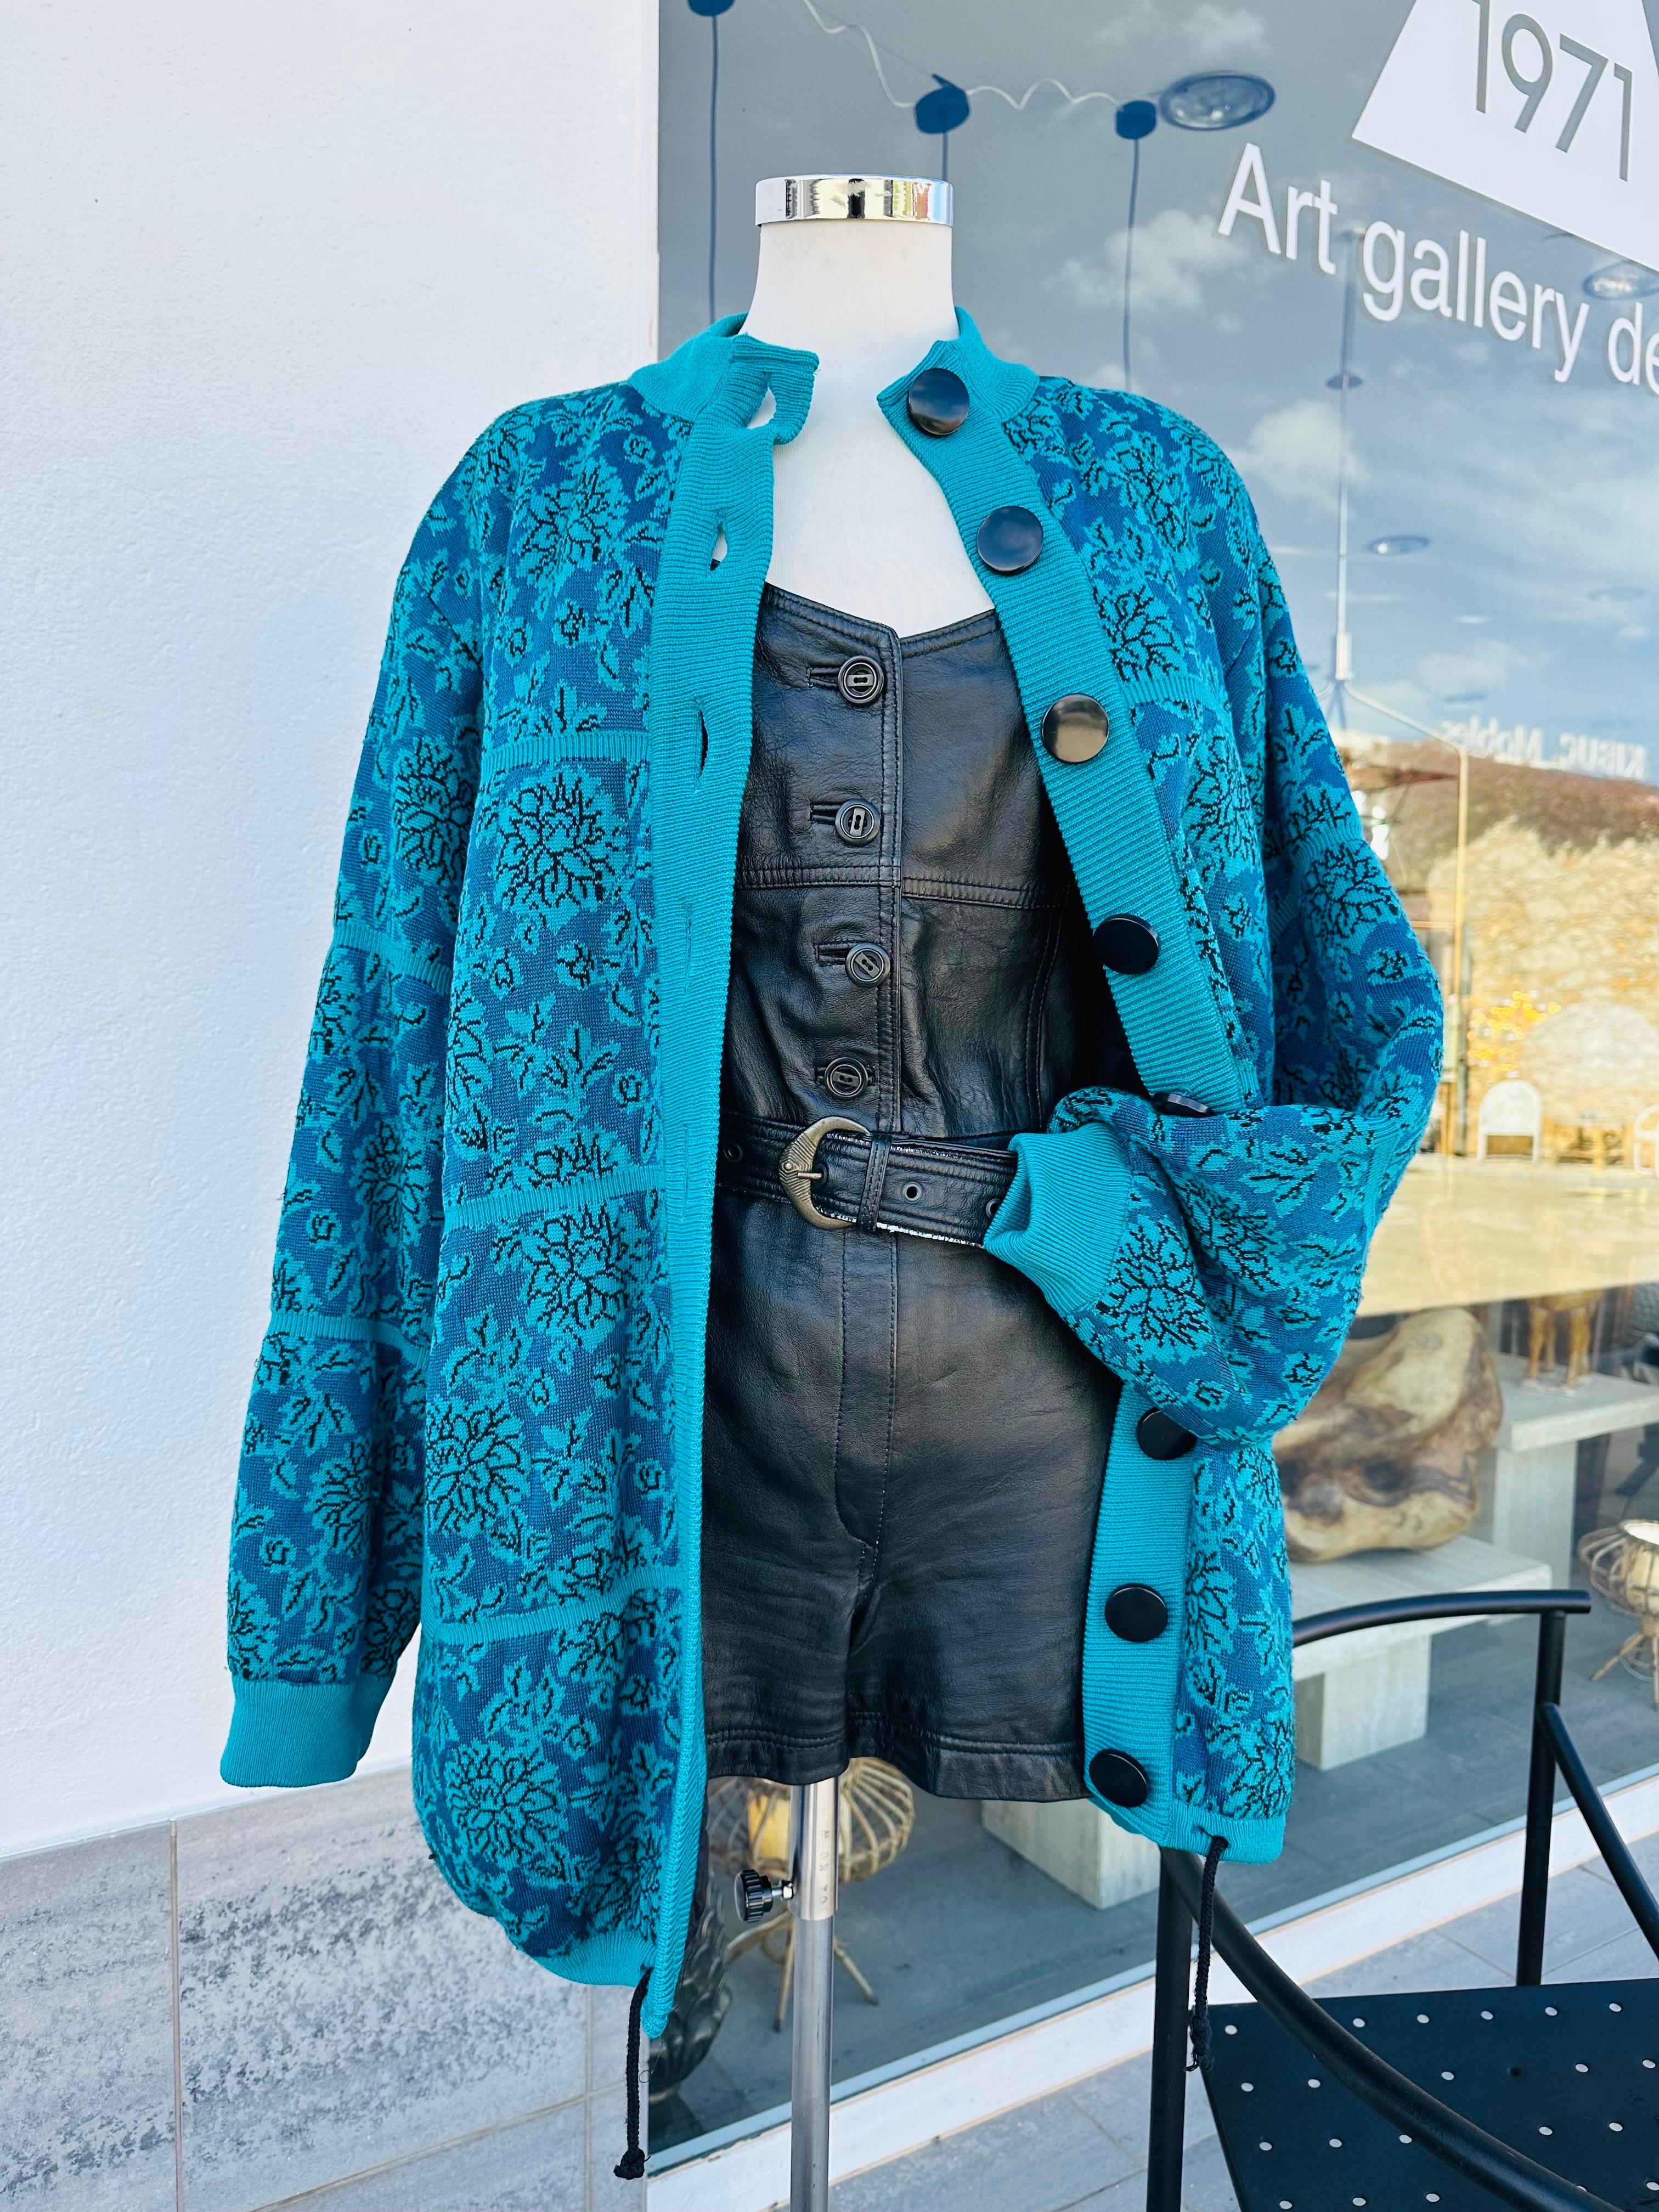 Vintage Yves saint Laurent jacket/coat in thick wool-blend knit, from the 80s.
Lined and quilted.
Straight cut, round collar, full-length buttoning.
Drawstring at bottom of coat.
Patch pockets on hips
Epaulets
Large black buttons.
Turquoise and